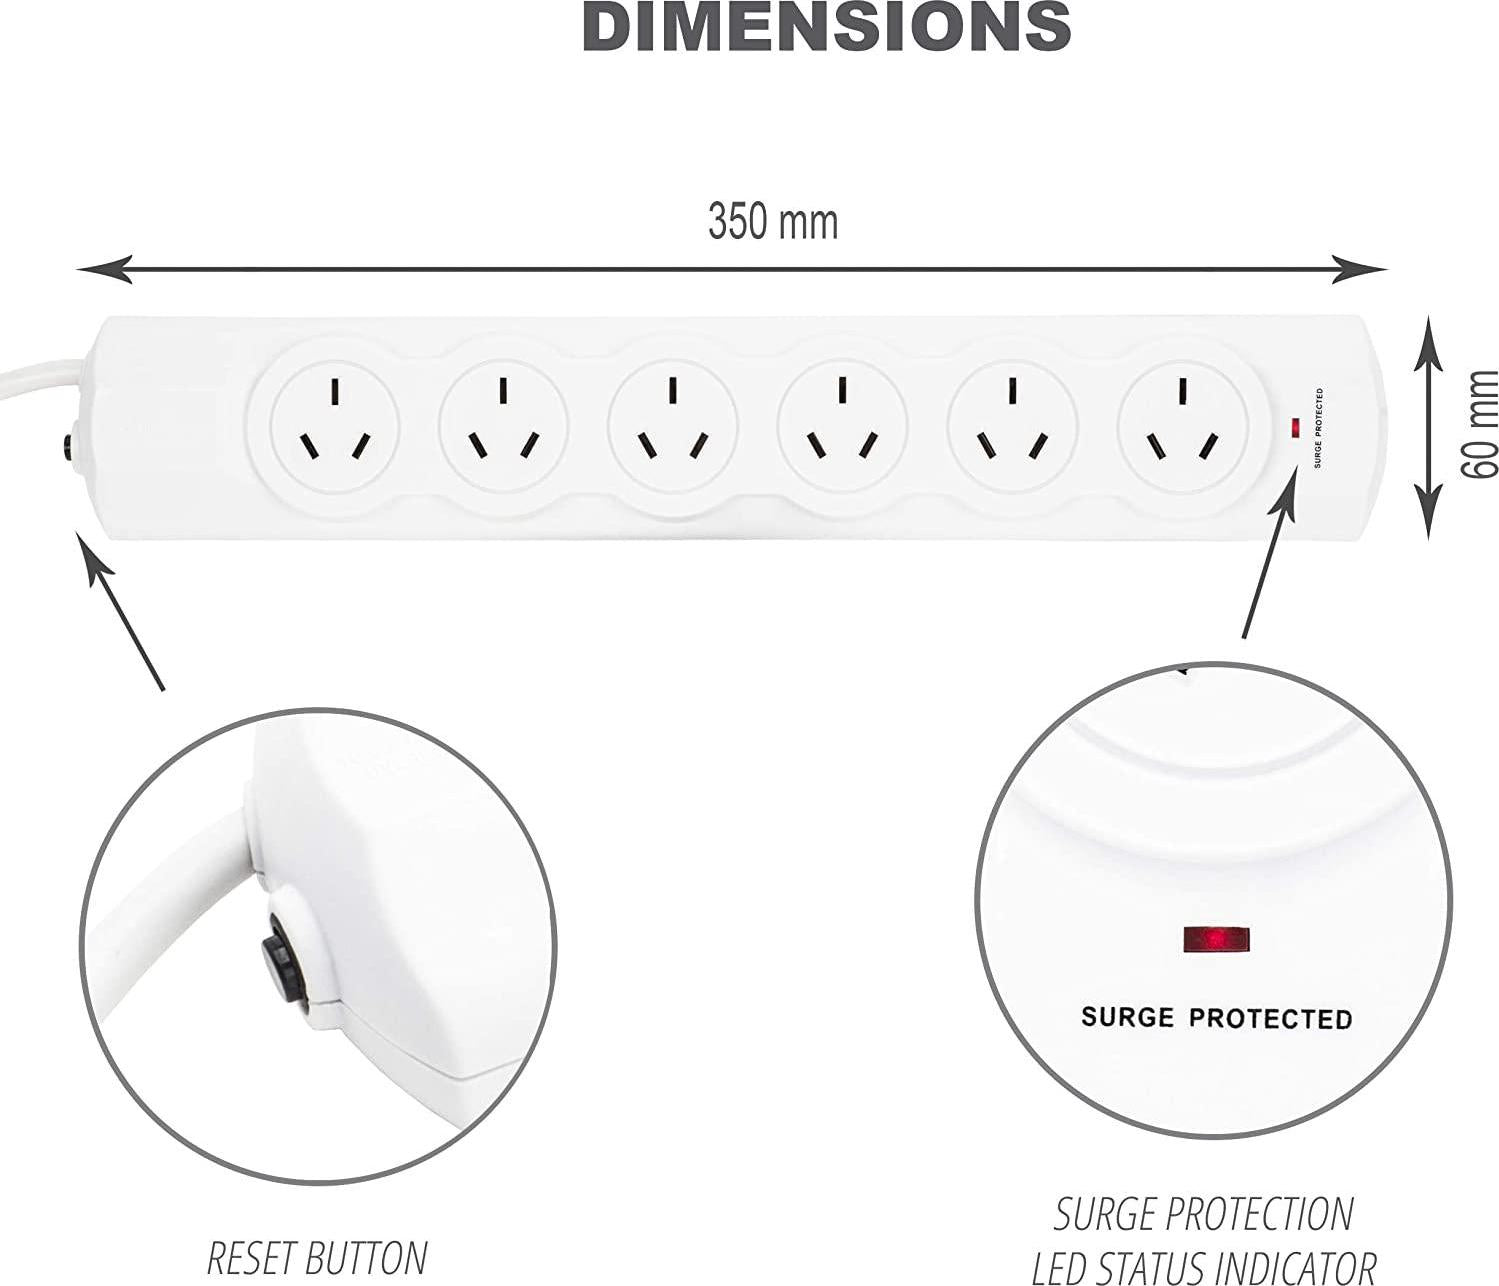 GOLINX, GOLINX 6 Outlet Power Board with Surge Protection, 1m Extension Cable and 10A Overload Protection. White Colour. SAA Approved for use in Australia and New Zealand